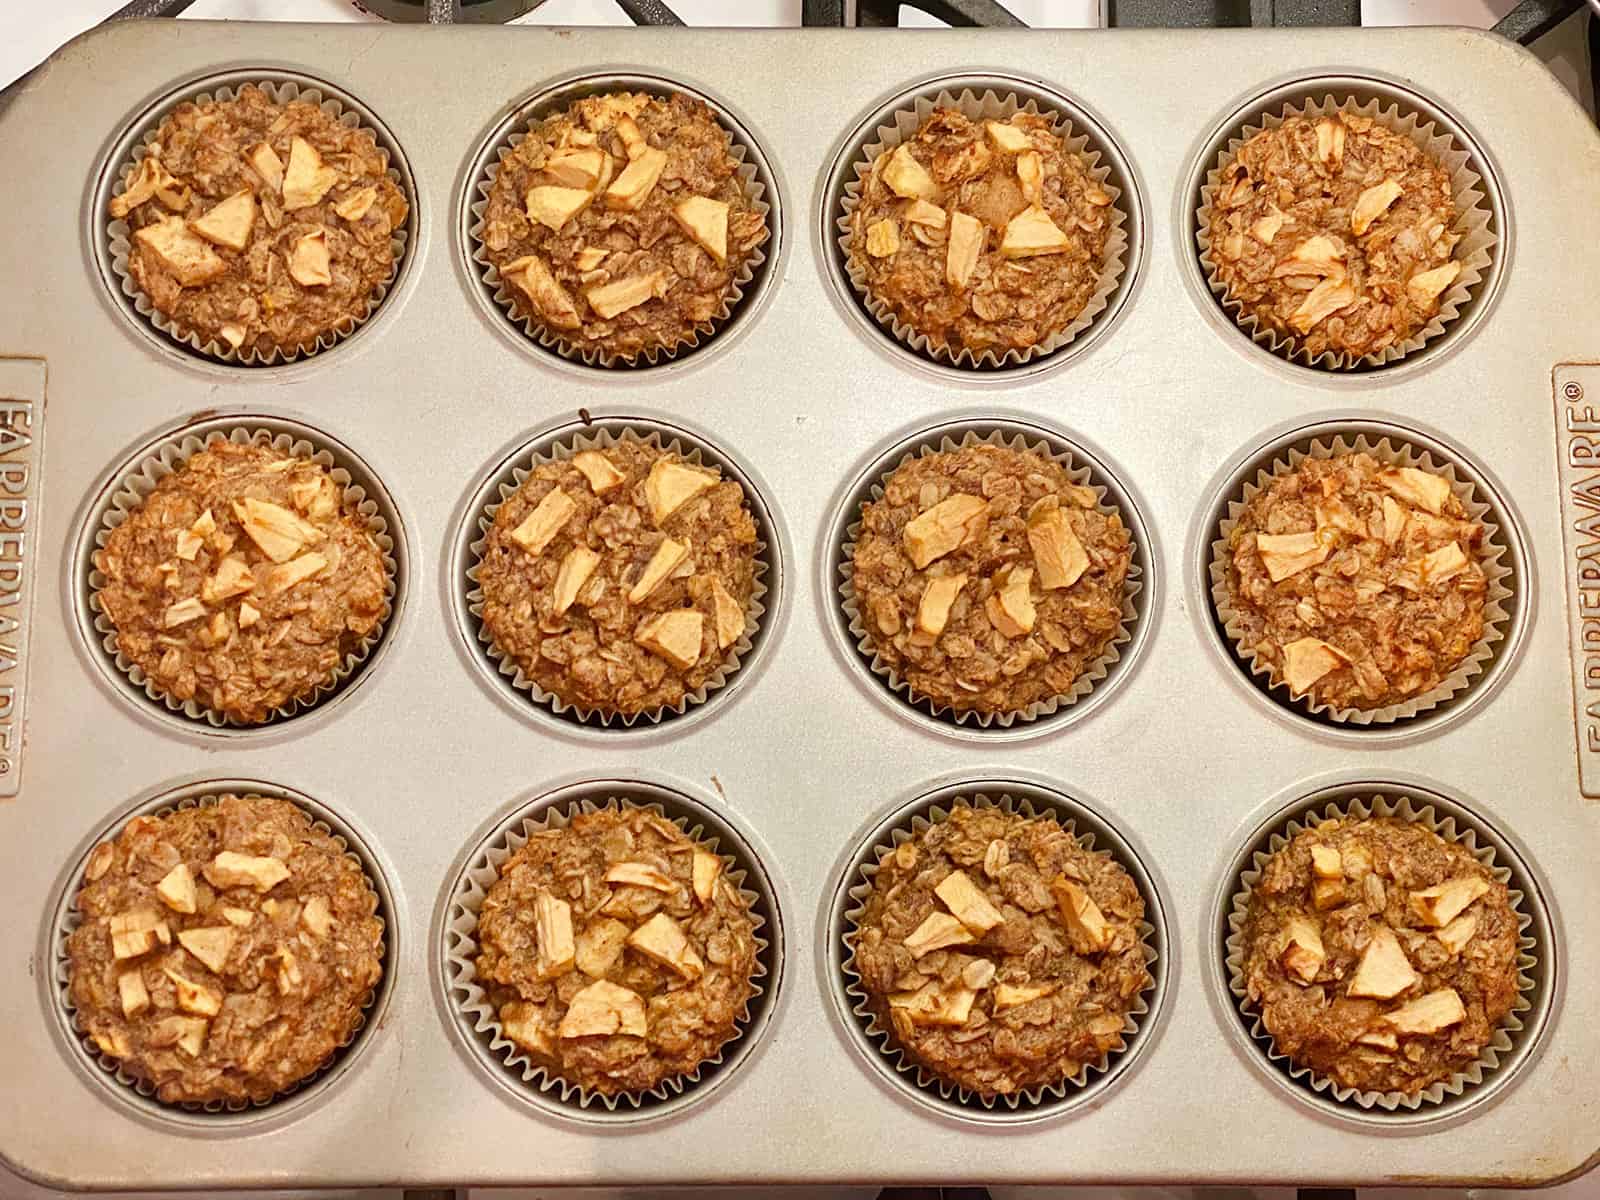 Apple Cinnamon Baked Oatmeal fresh out of the oven